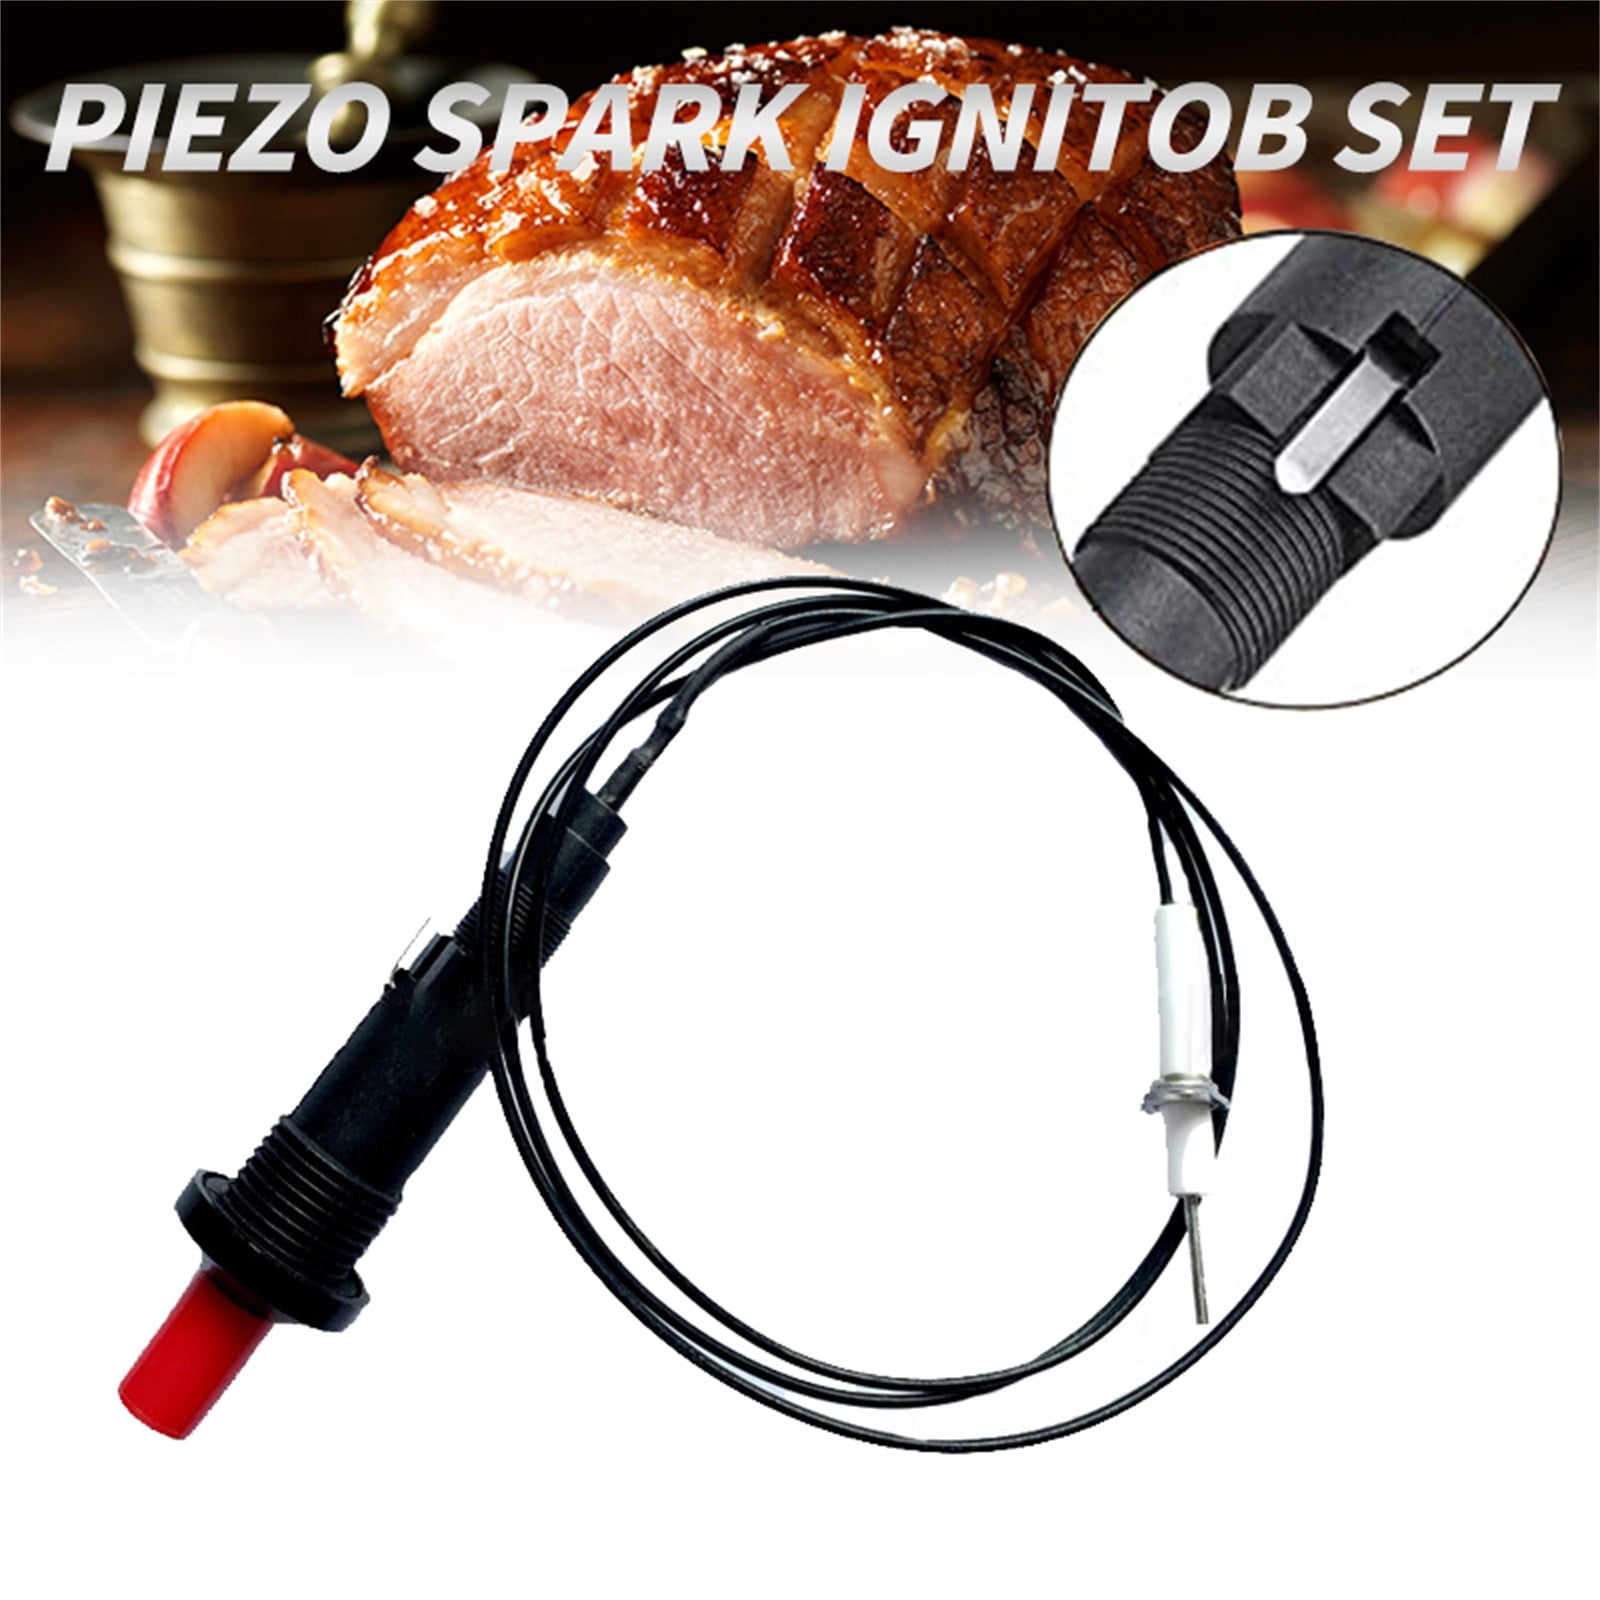 PIEZO SPARK IGNITOR FOR GAS FRYER GRIDDLE OVEN RANGES 